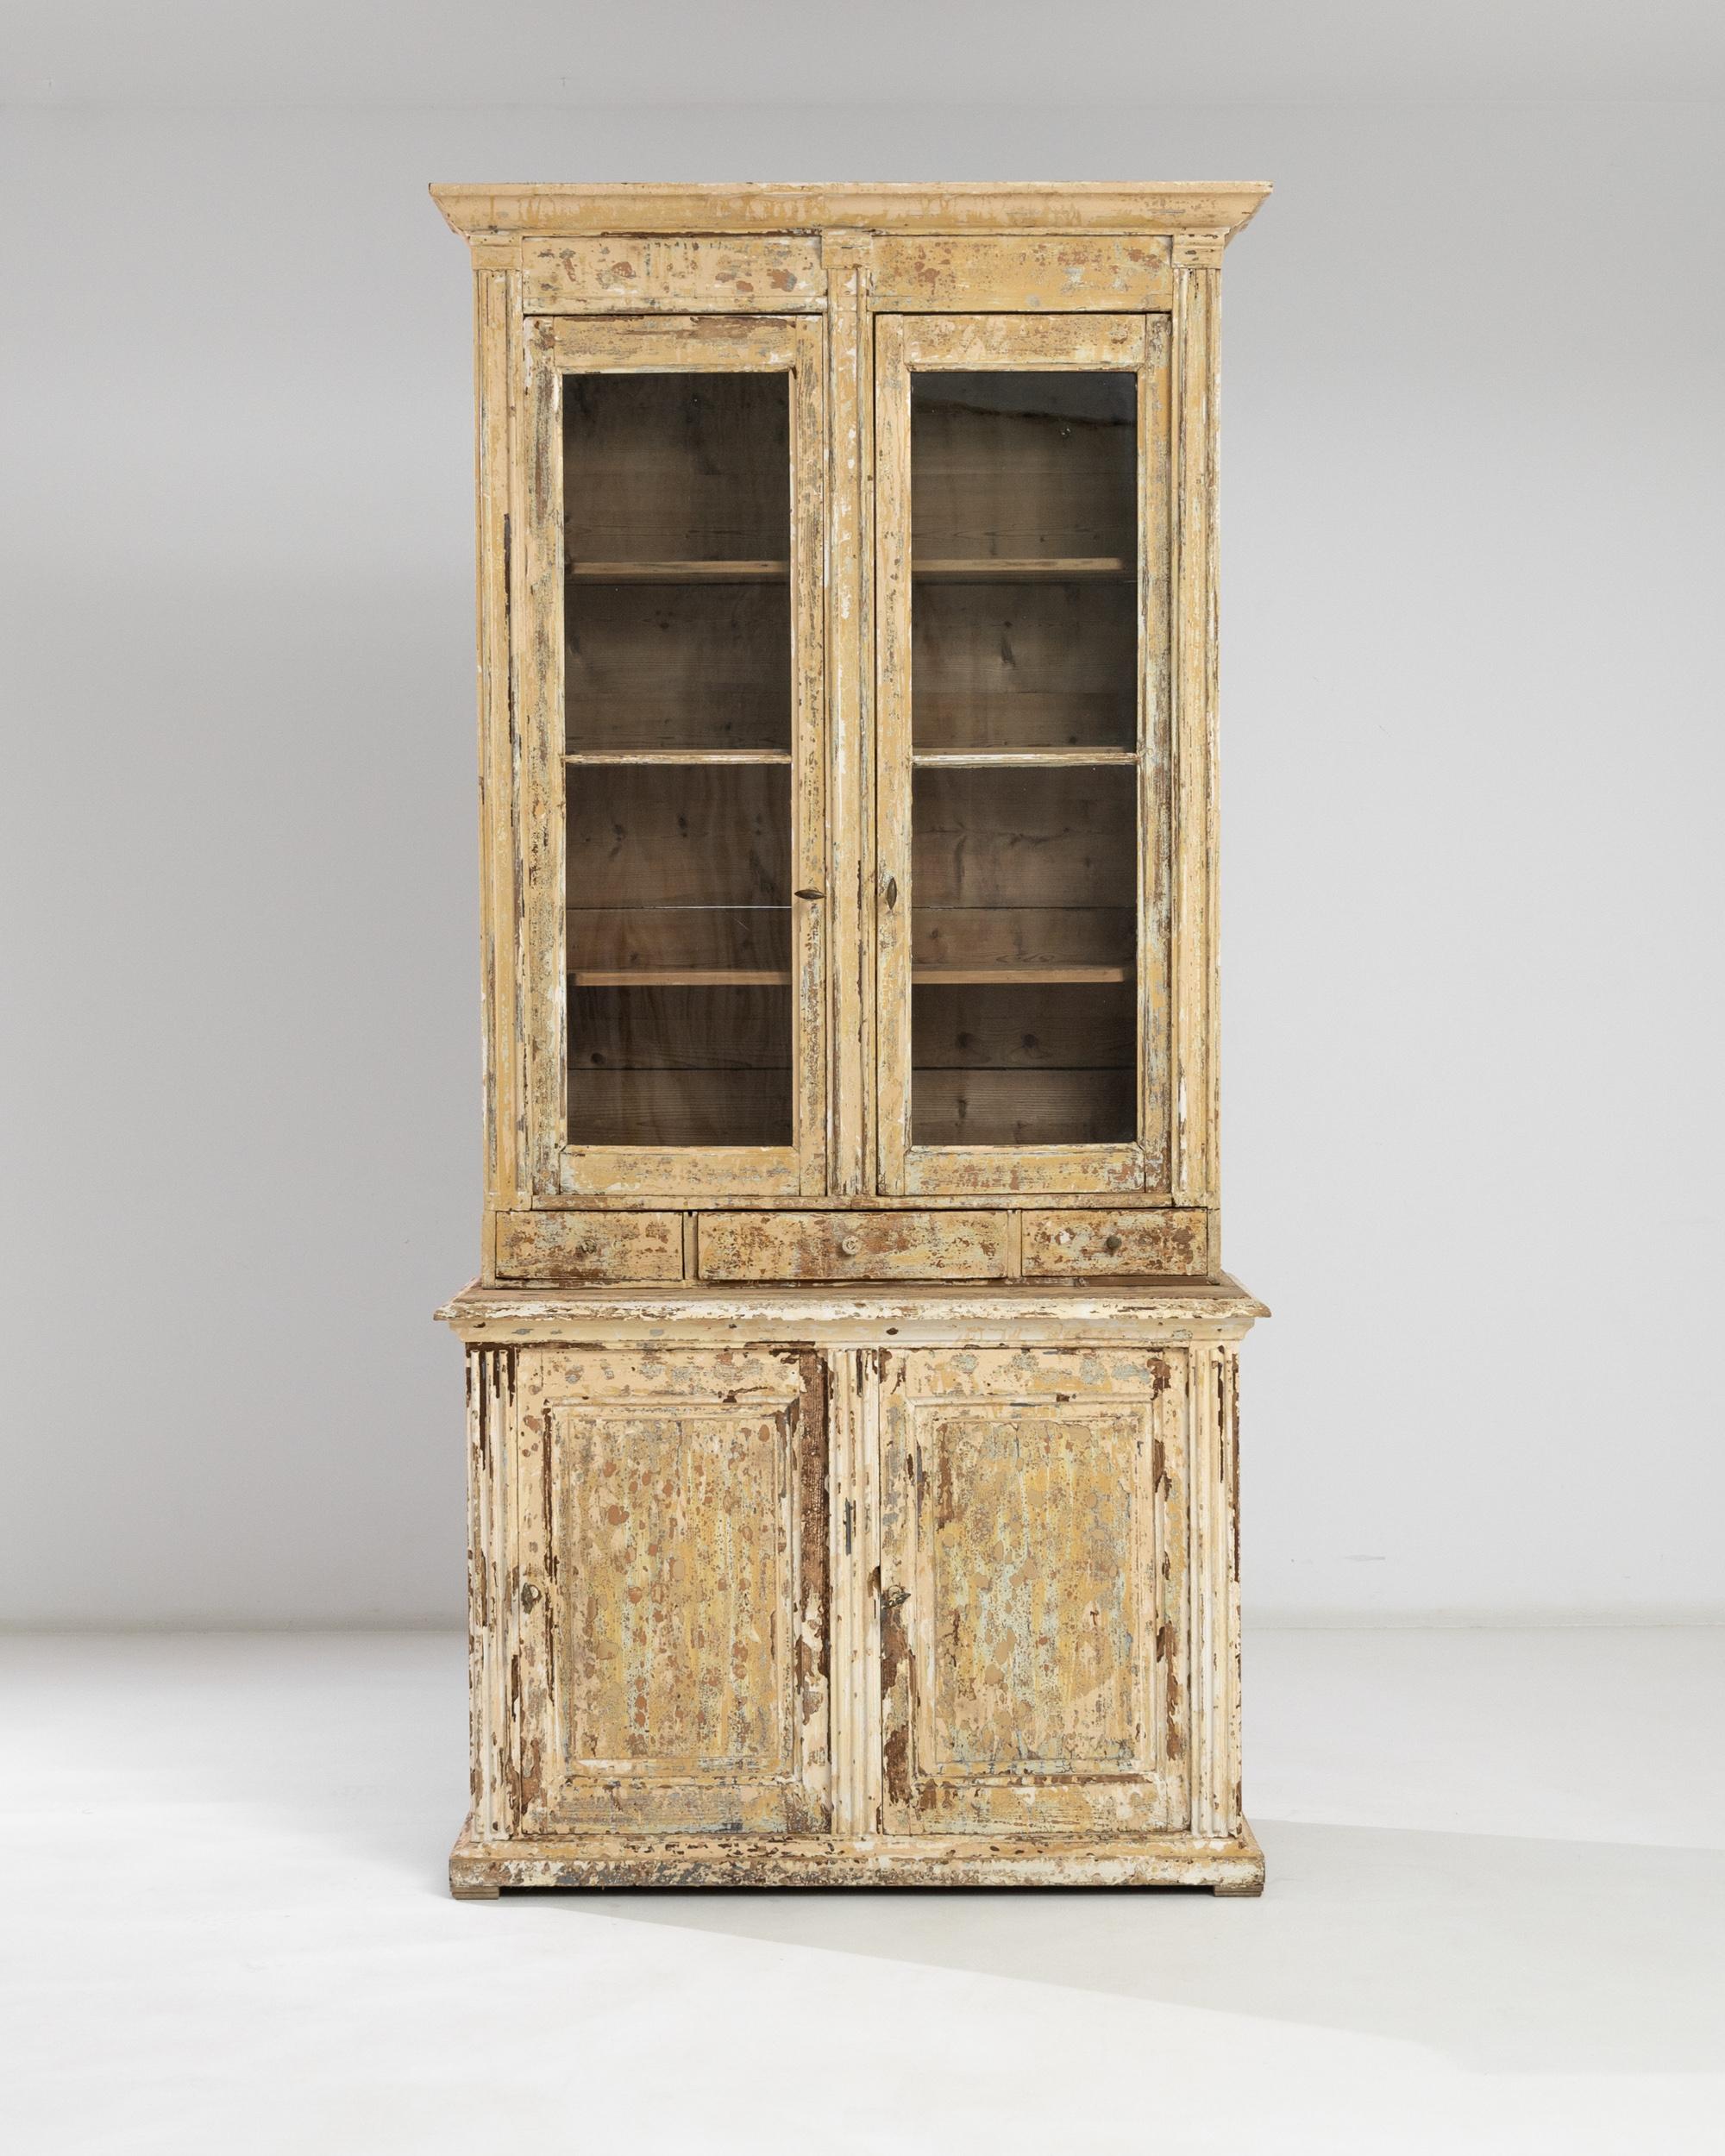 This statuesque vitrine crafted in France in the early 20th century impresses with the unique patchy texture of the original patina that accentuates bold outlines of the chest: the raised doors of the lower compartment adorned by flute side